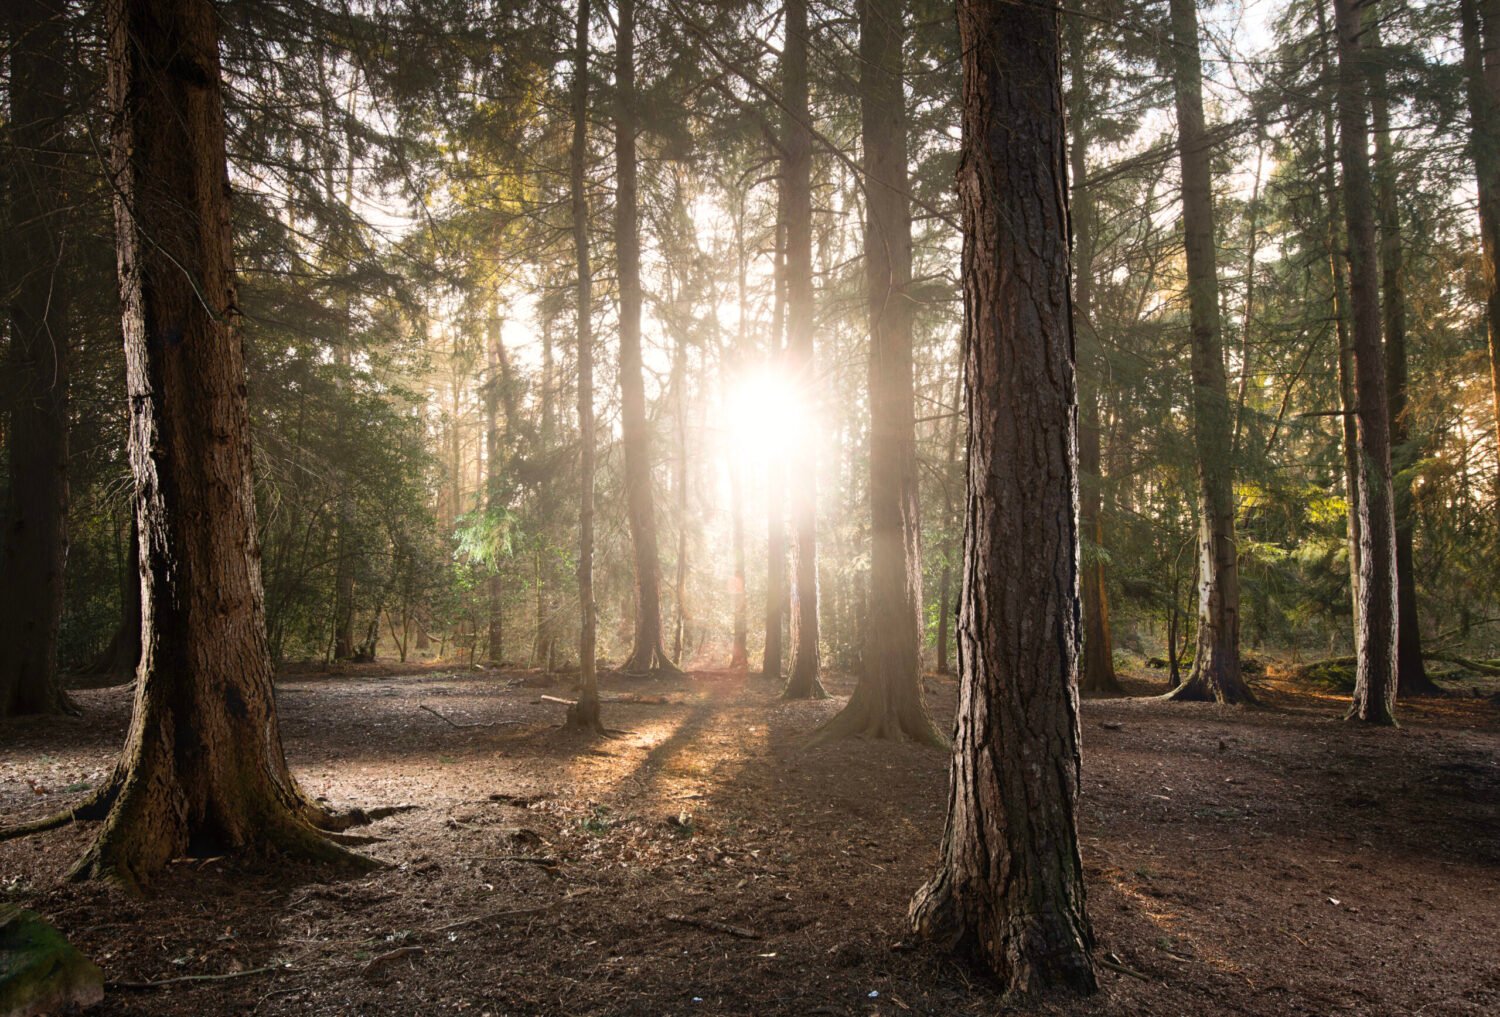 Sunlight streaming through a forest of tall pine trees.